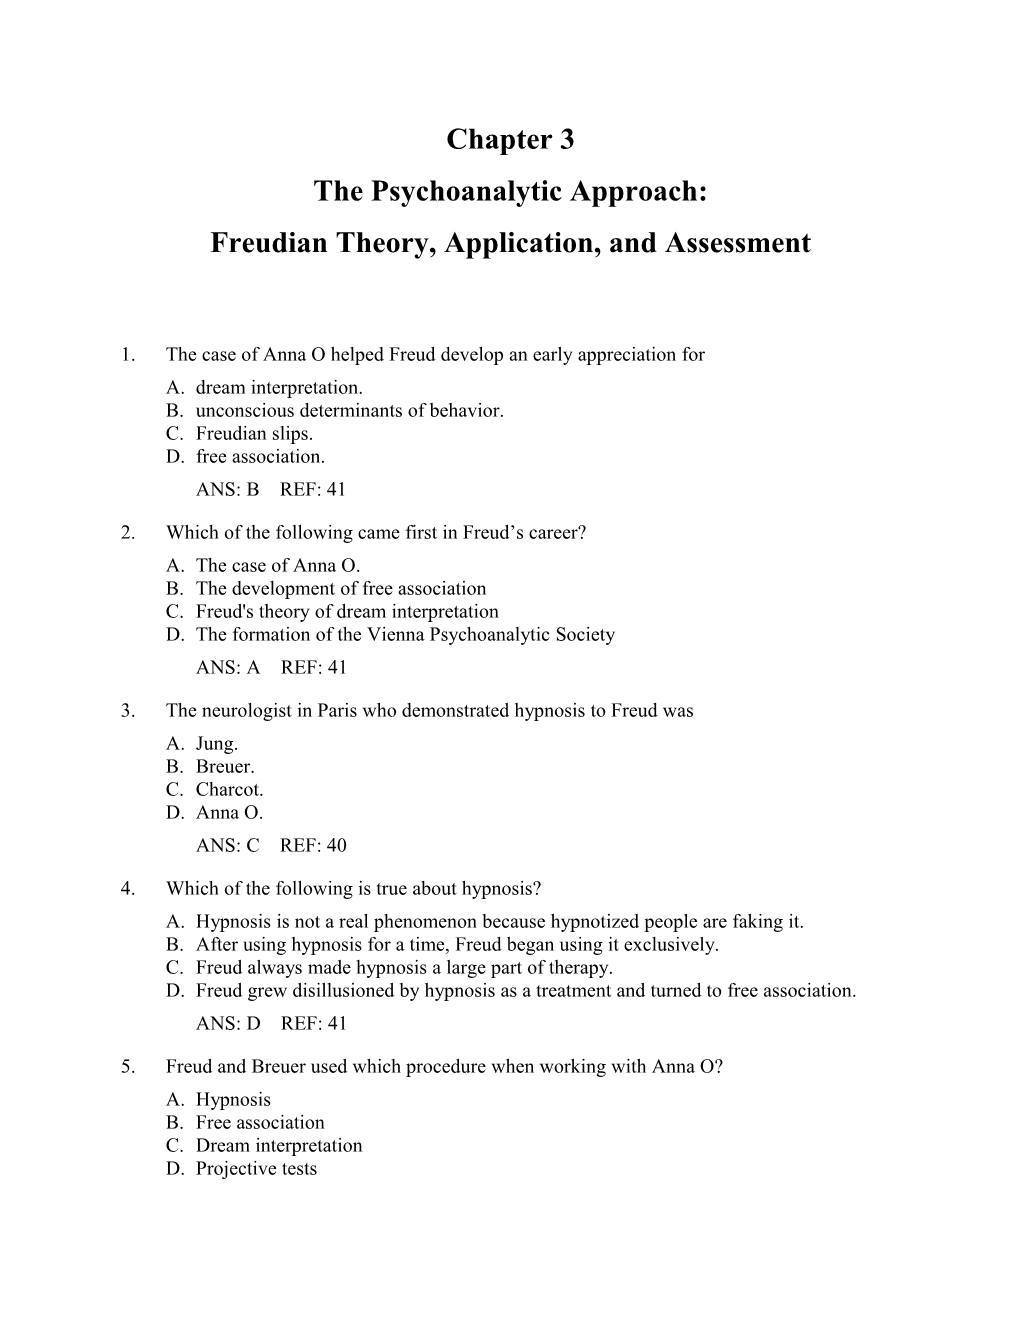 Freudian Theory, Application, and Assessment